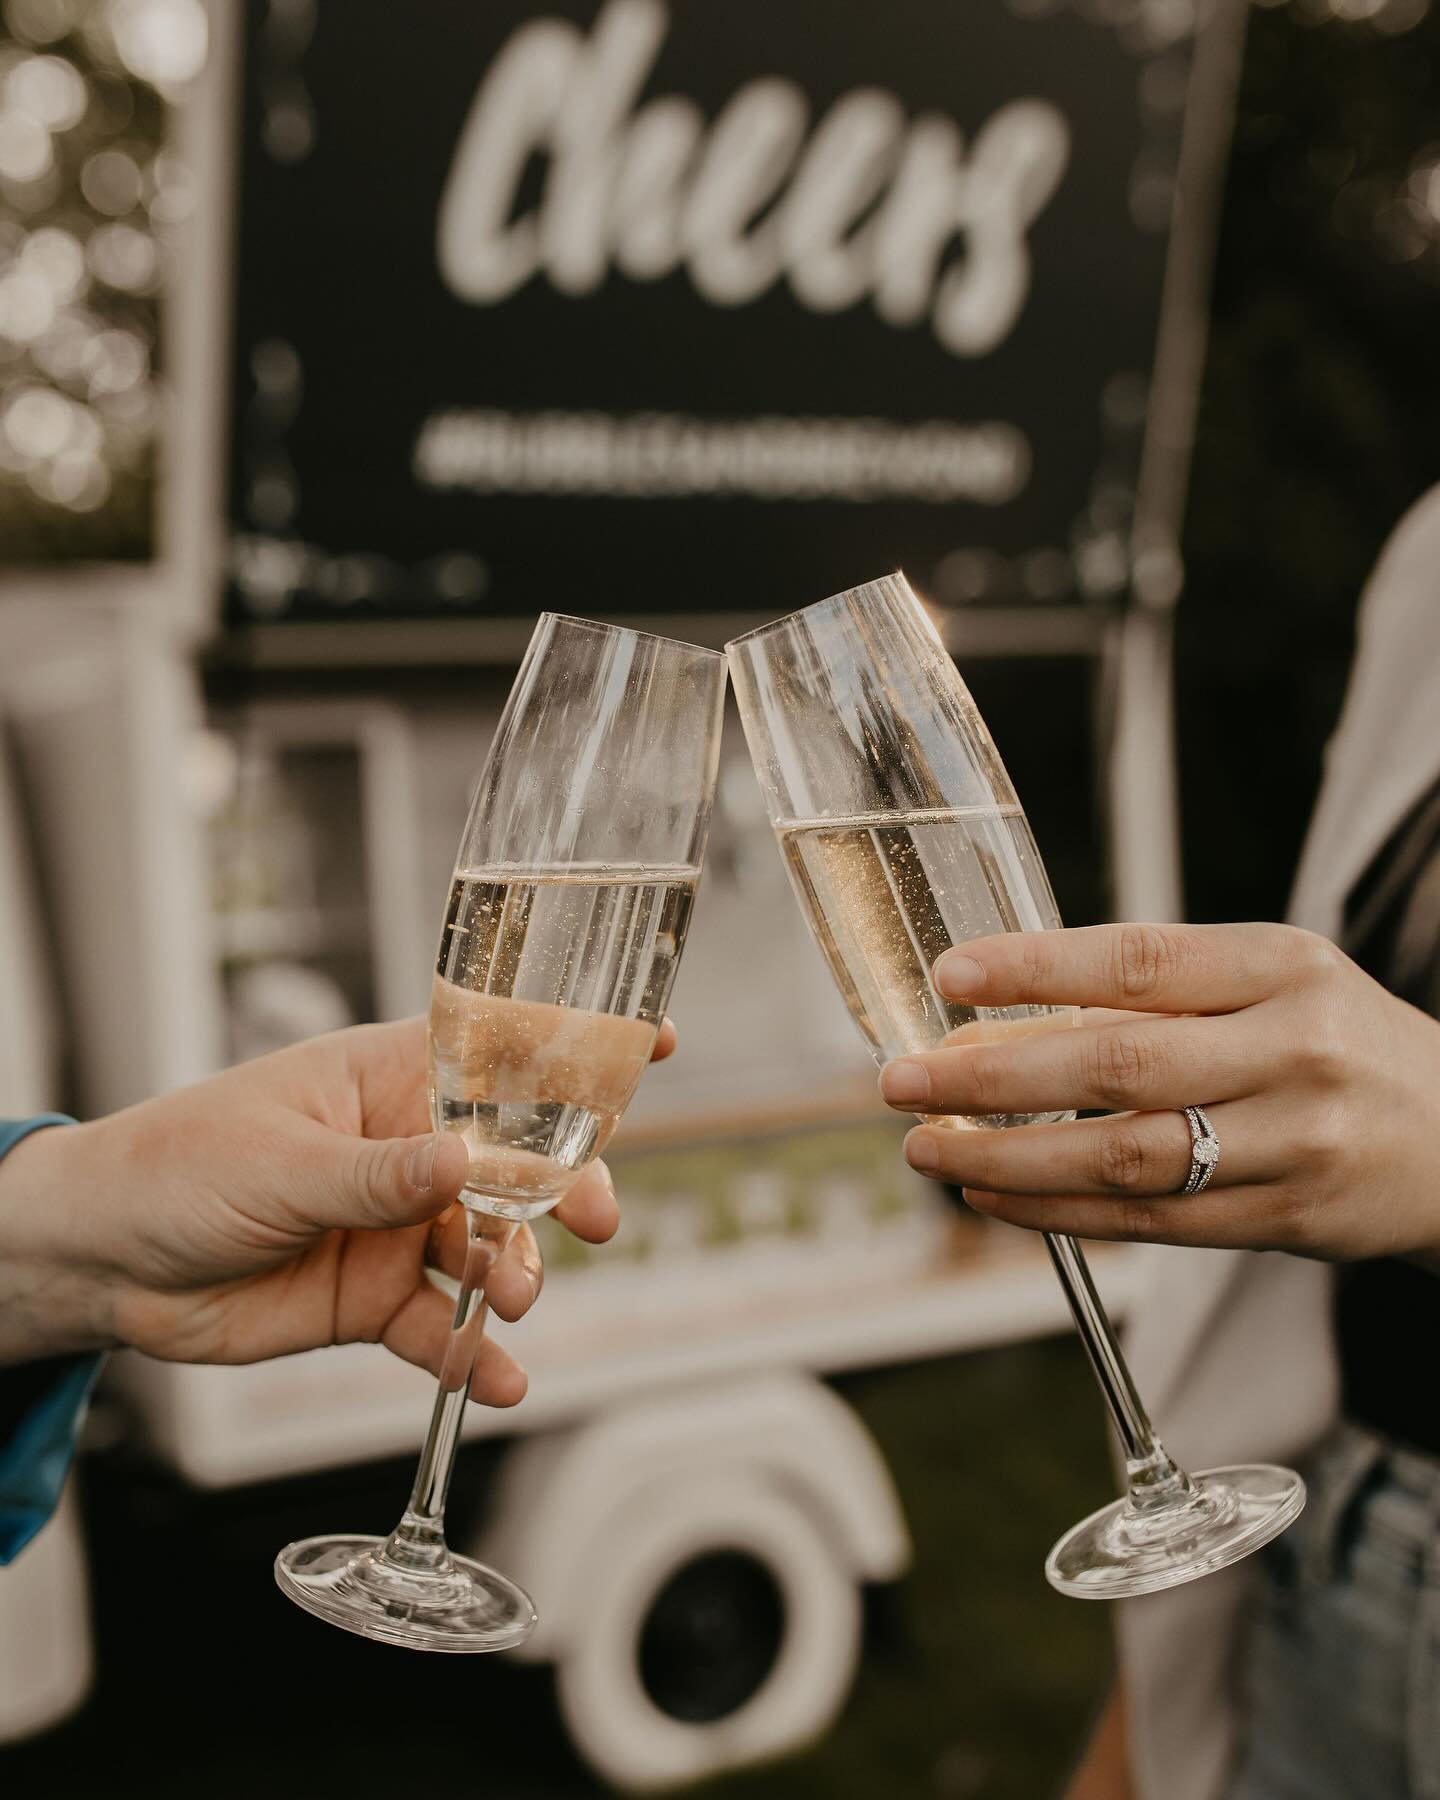 Raising a glass to all the women out there today &amp; every day🥂 Happy International Women&rsquo;s Day!

📸: @rachelkost.photo 

#internationalwomensday #women #womensupportingwomen #cheers #womanowned #smallbusiness #mobilebar #bar #raiseaglass #b